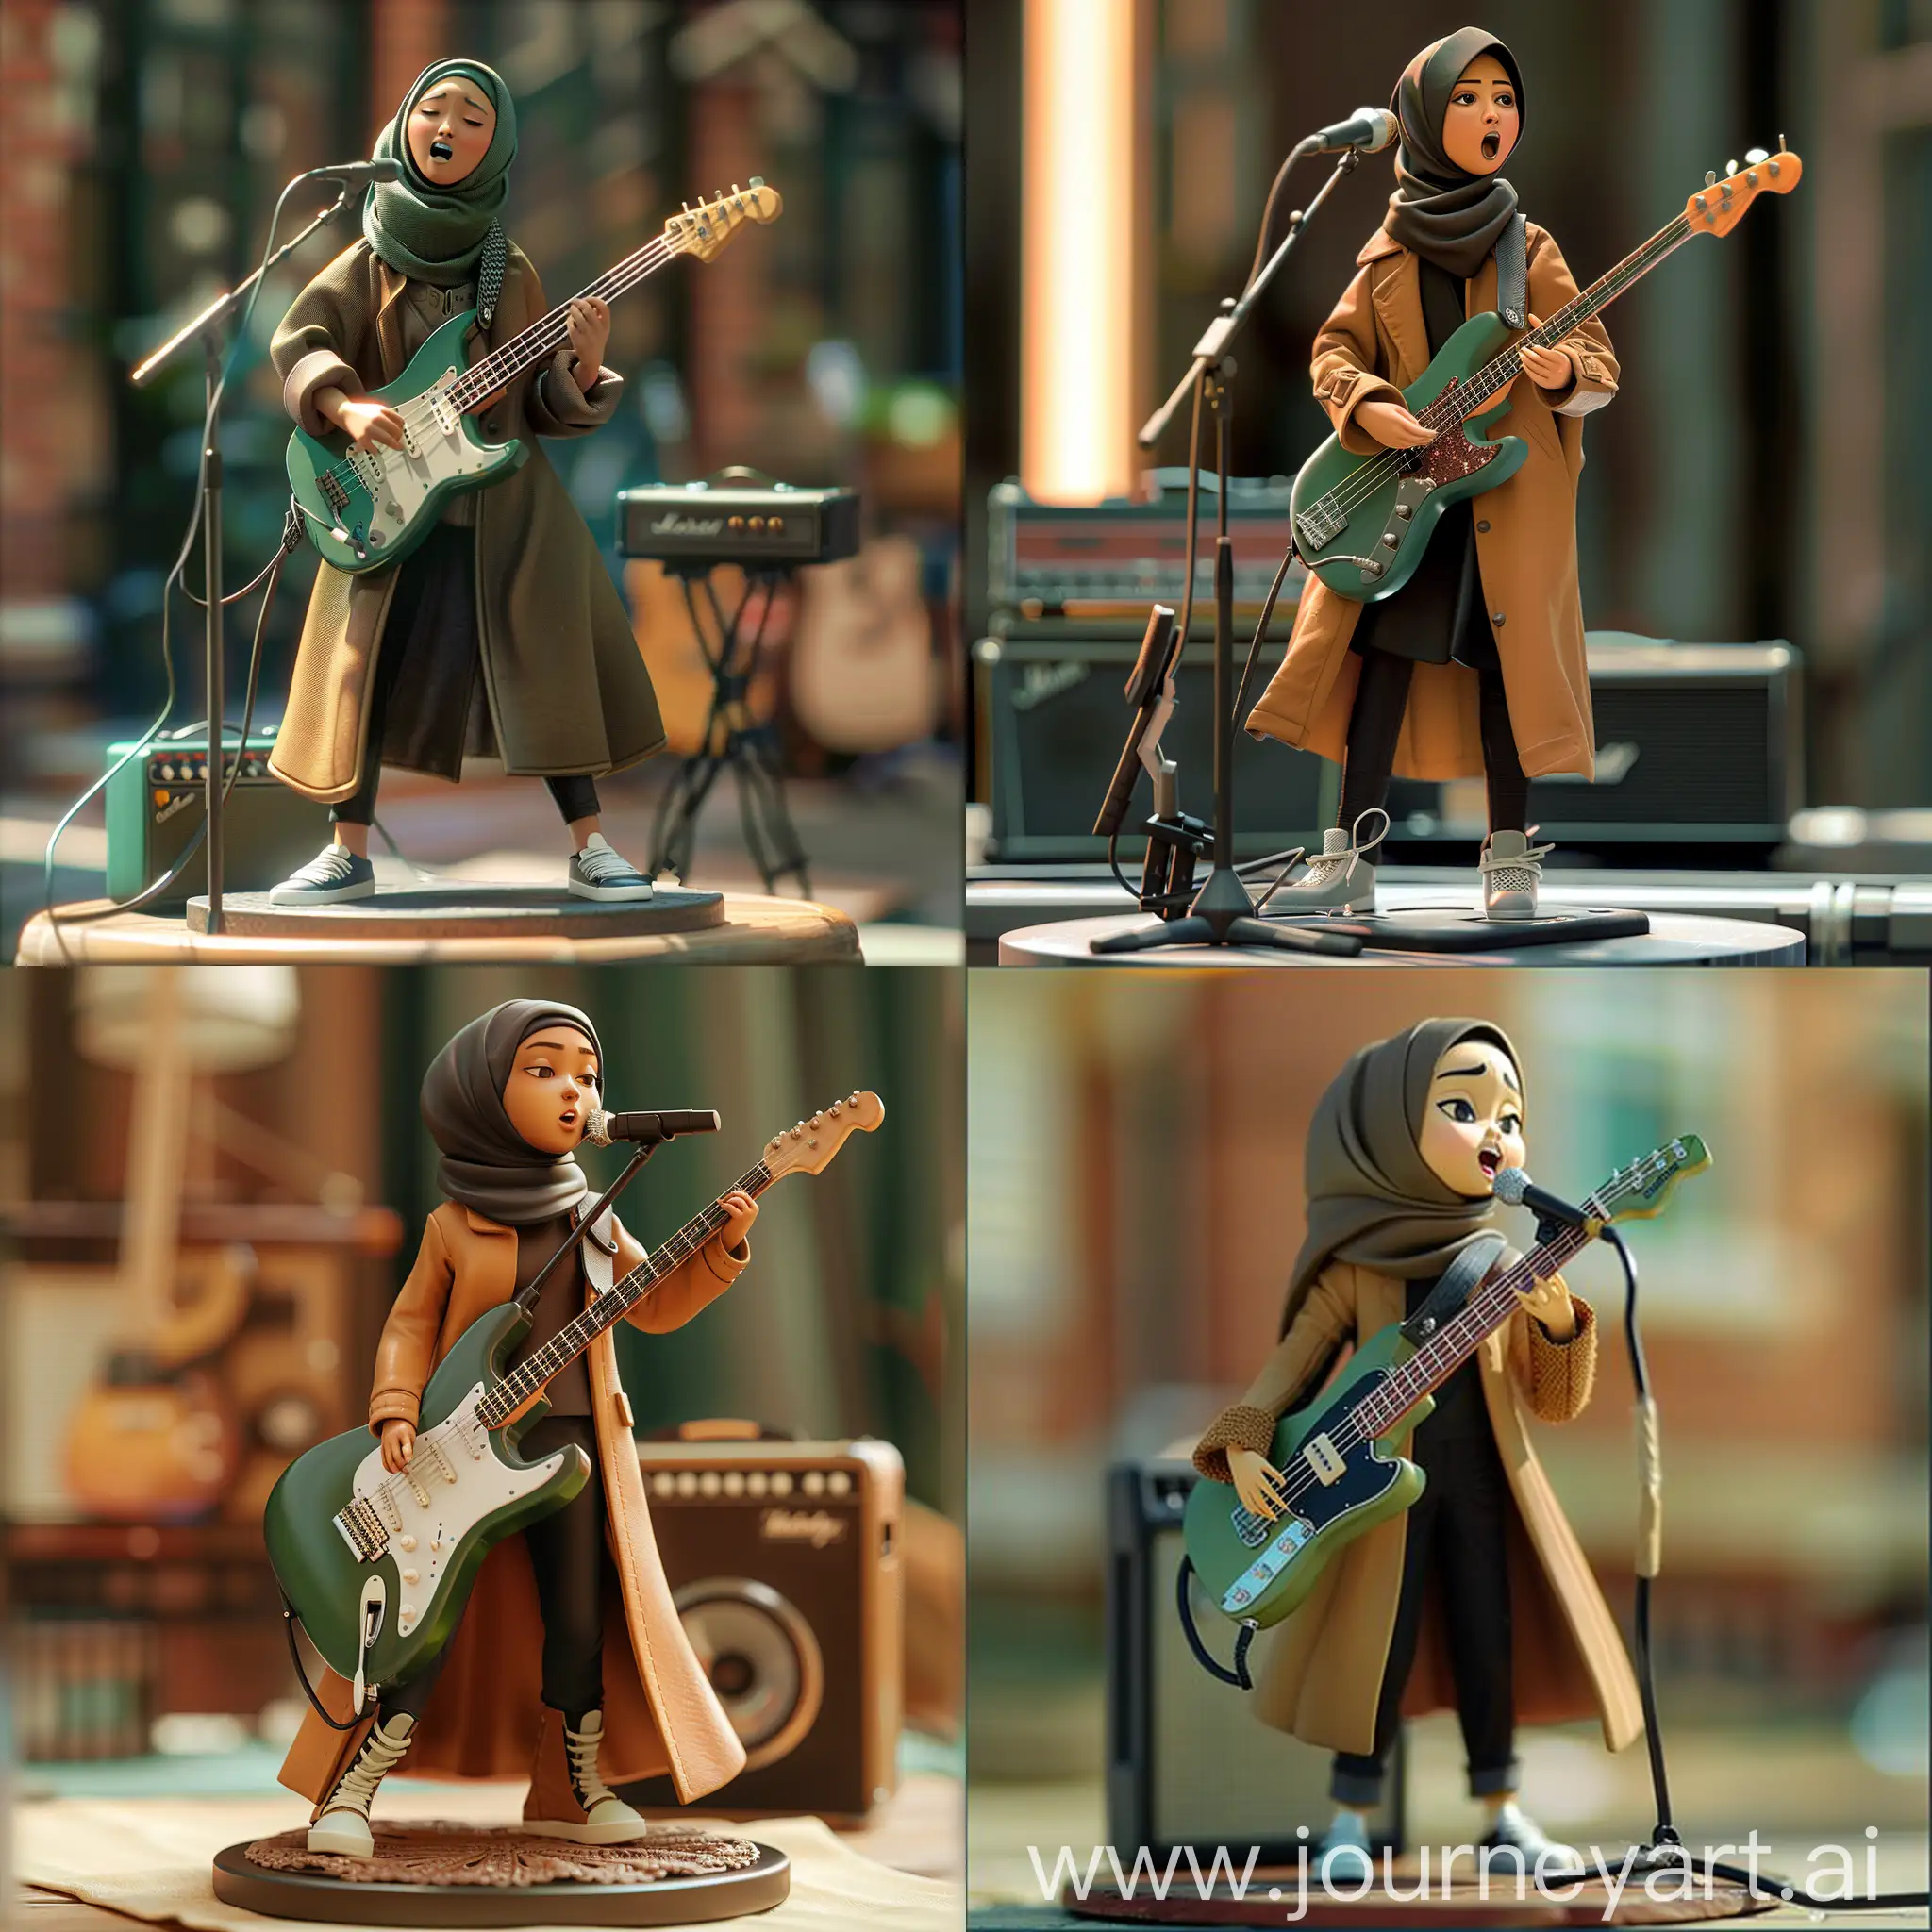 Fashionable-Animation-Style-Indonesian-Woman-Singing-with-Green-Electric-Guitar